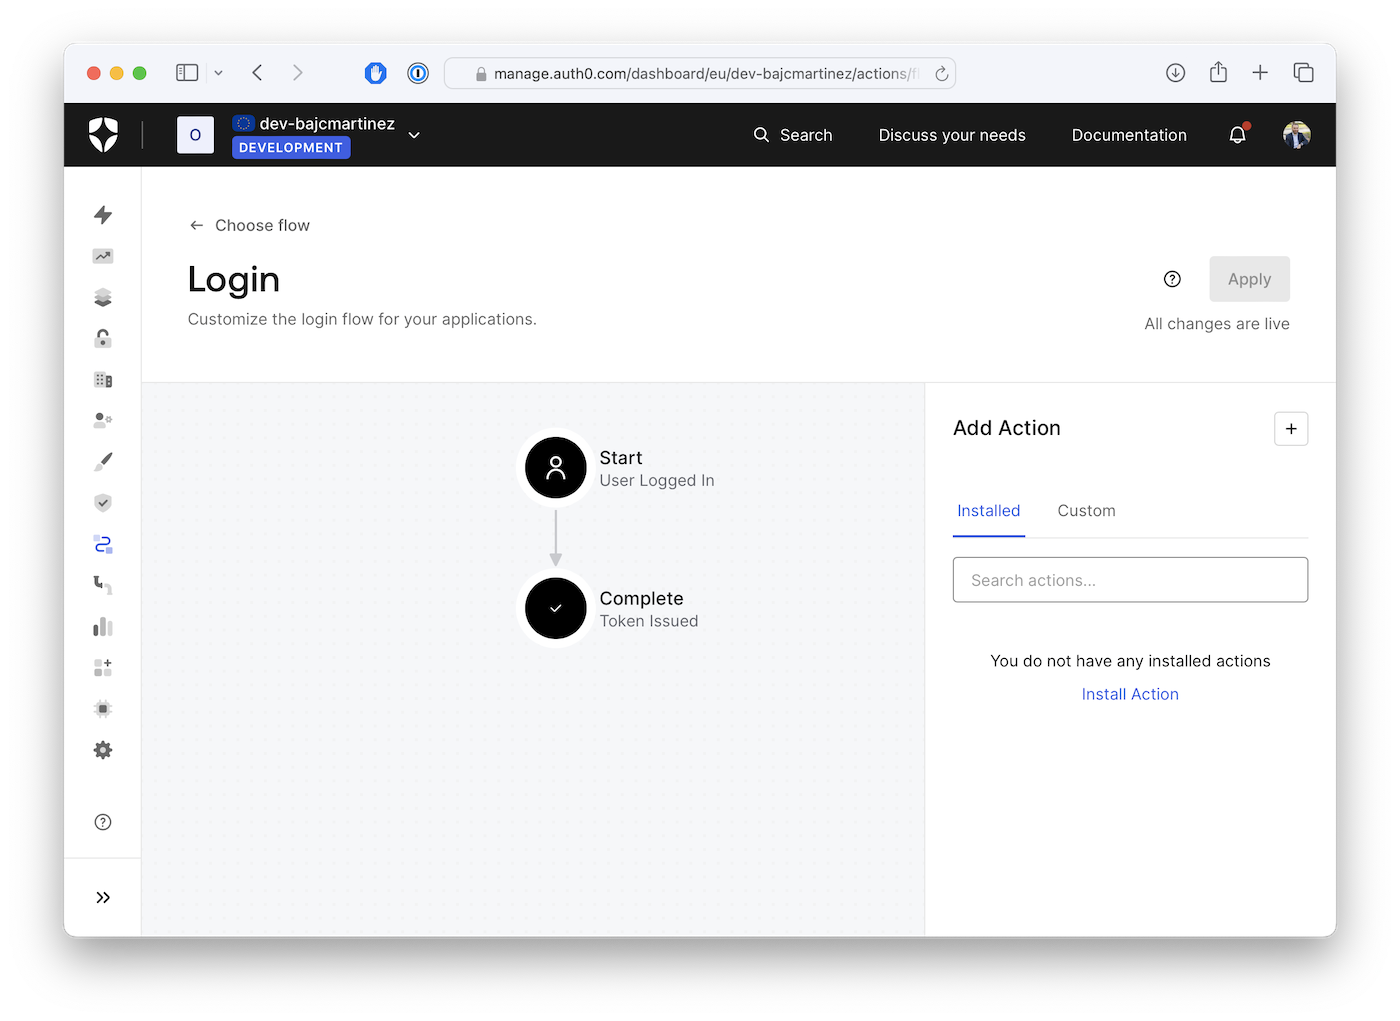 The “Login” flow page of the Auth0 dashboard.